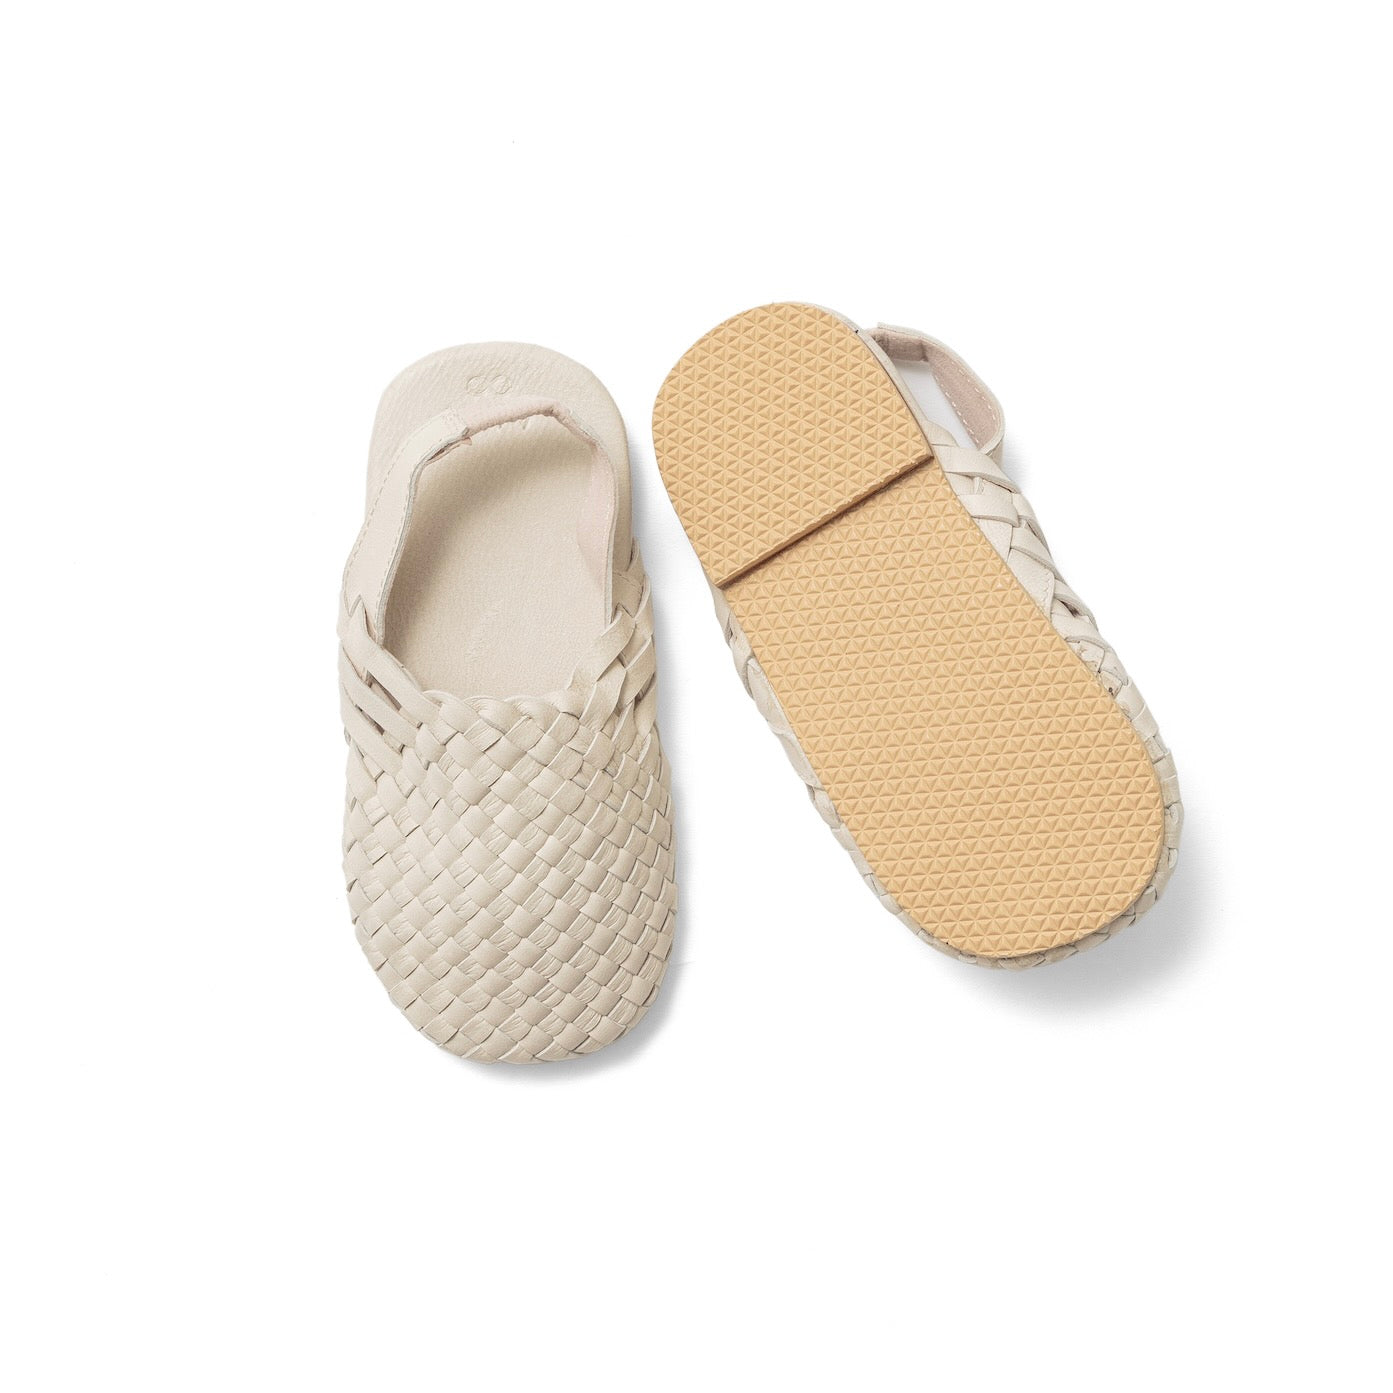 -KIDS- Woven shoes / IVORY